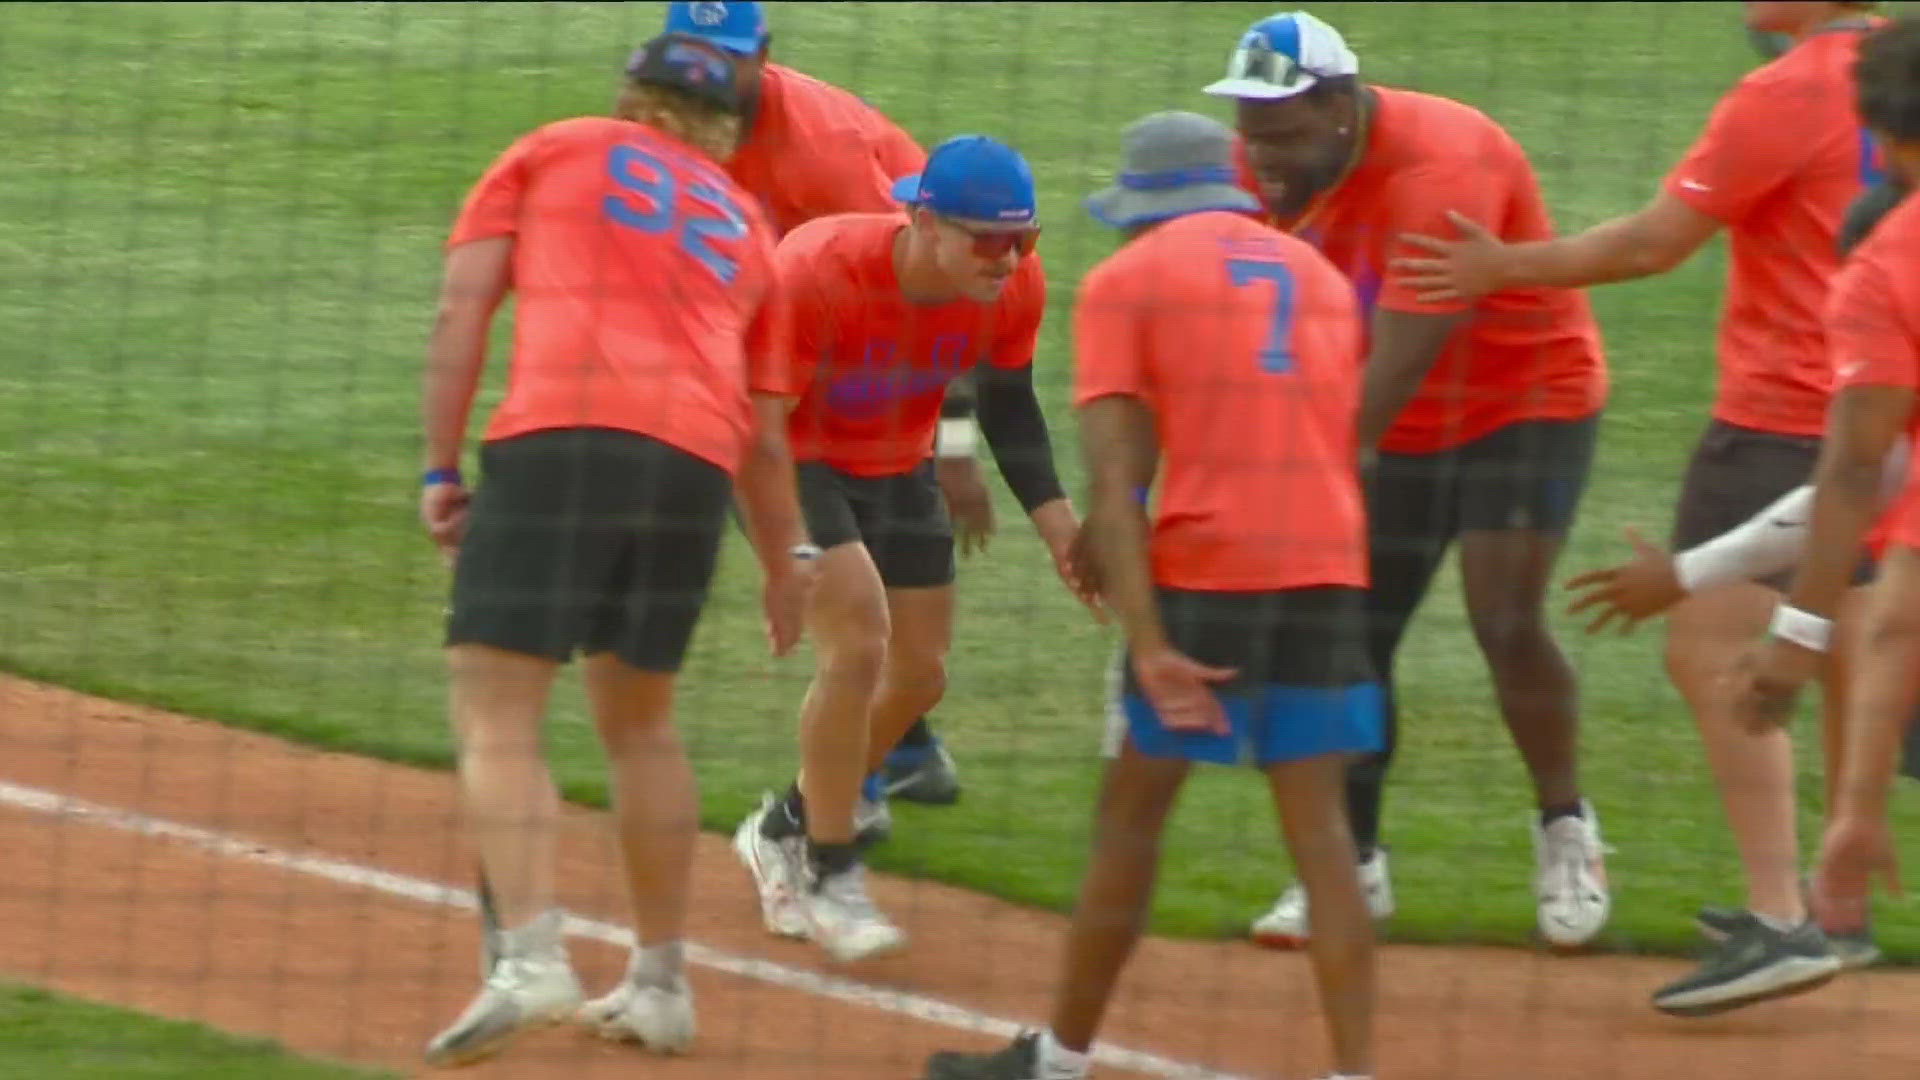 Current and former Boise State football players returned to Memorial Stadium on Wednesday to compete in the home run derby and Summer Softball Classic.